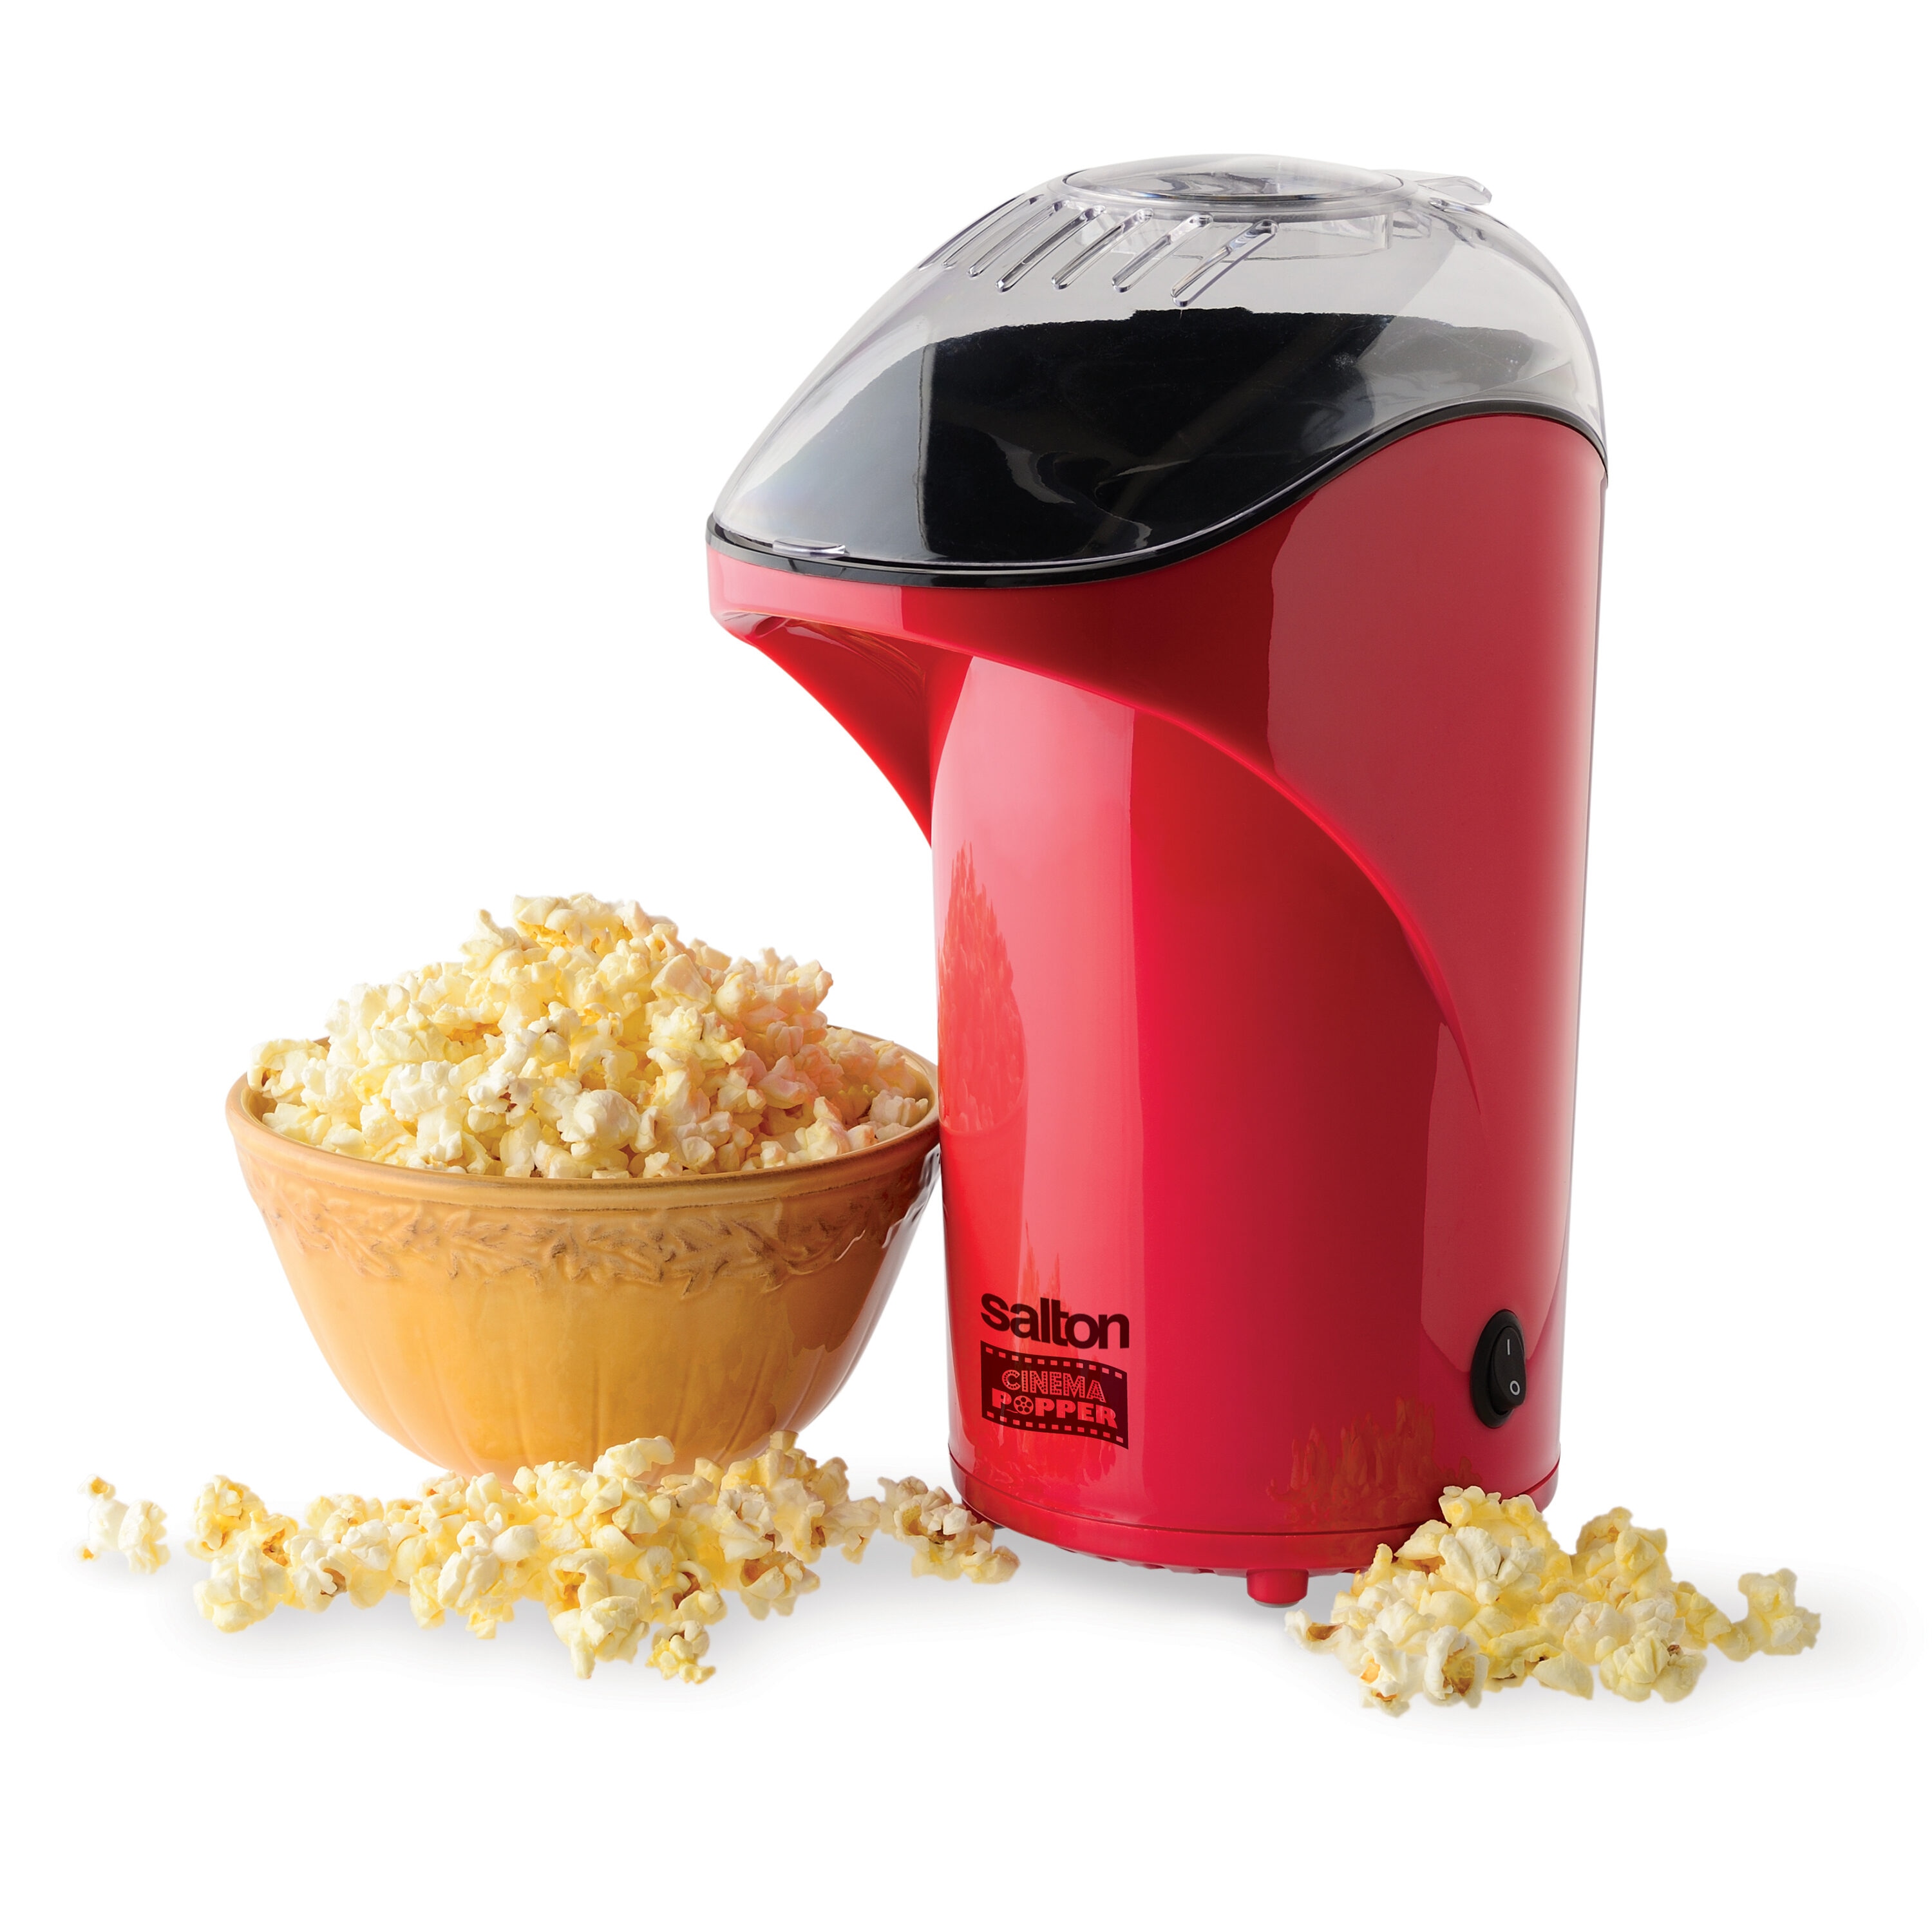 Air Popper Popcorn Maker - 1200W Electric Popcorn Popper - Quick Oil-Free Hot Air Popping - Mini Popcorn Machine by Great Northern Popcorn (White)